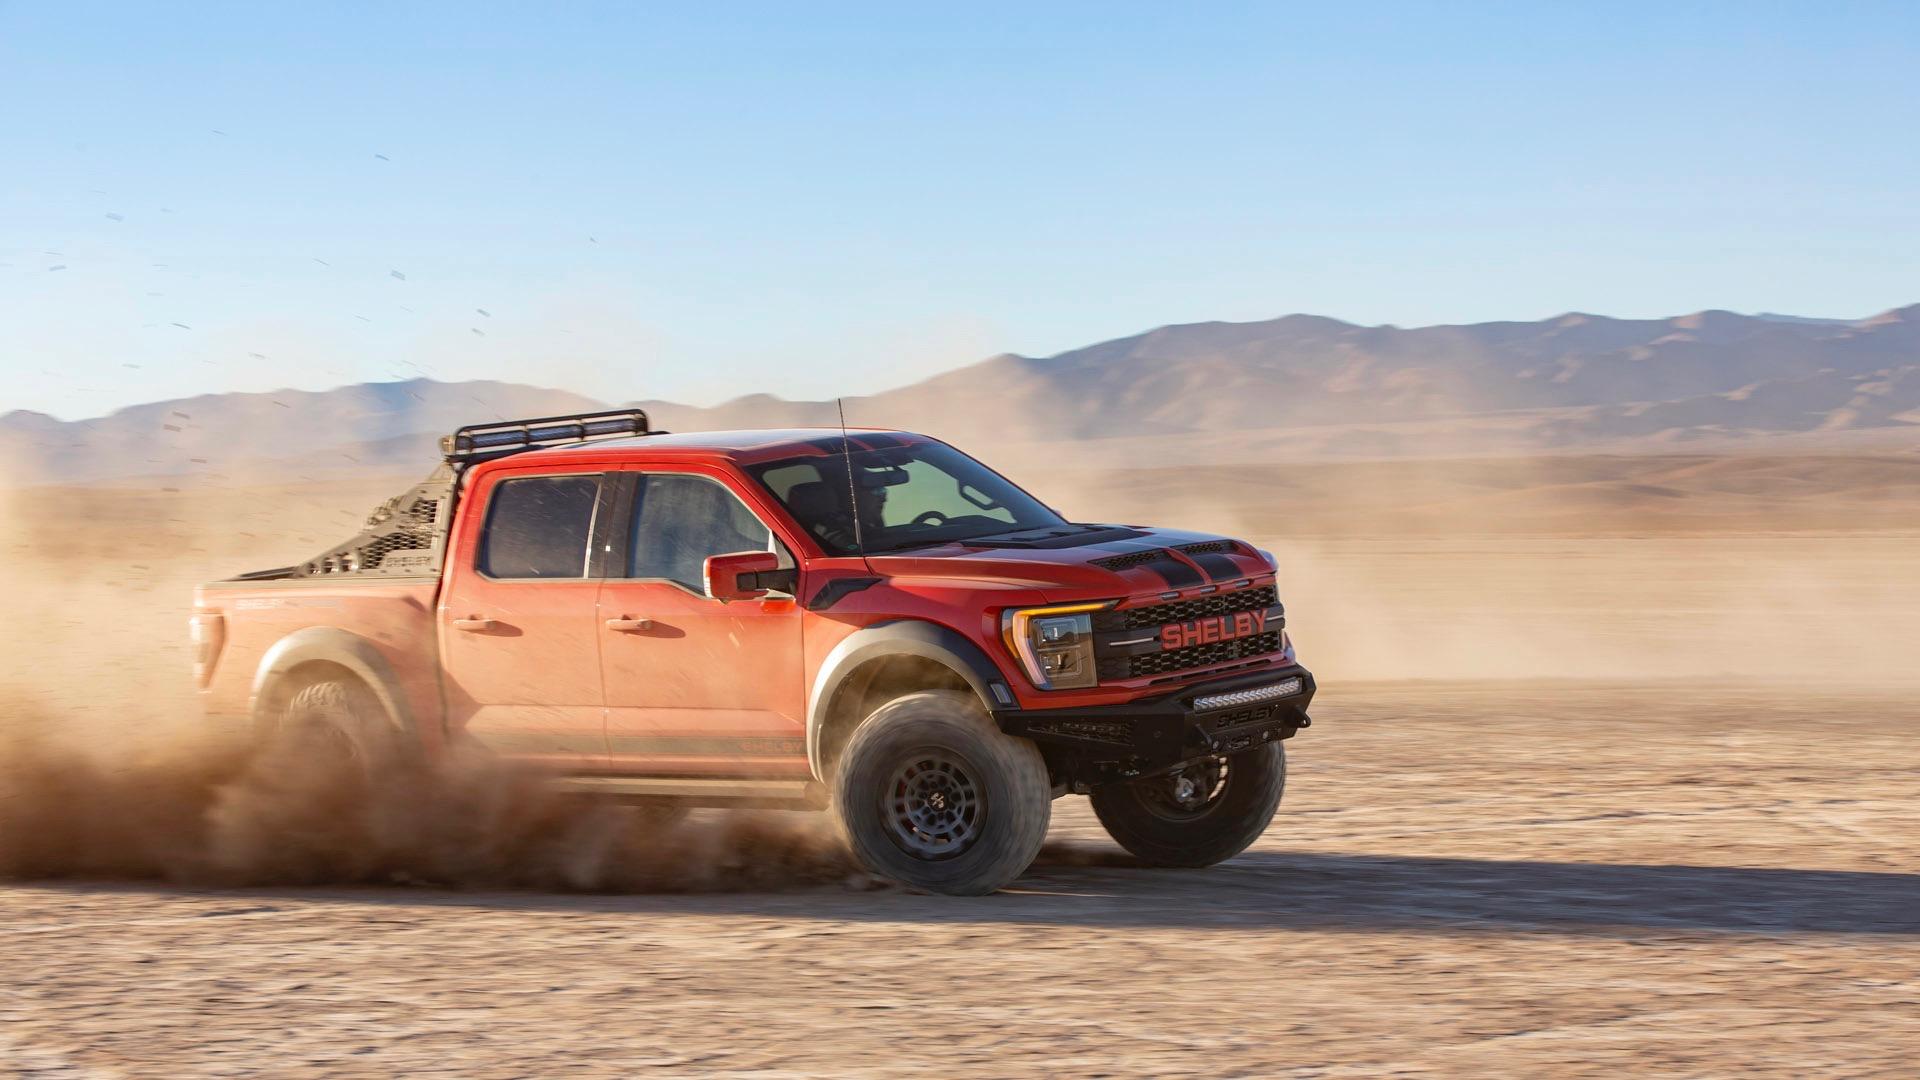 The 2022 Ford Shelby Raptor arrives with 525 horsepower | Modified Rides